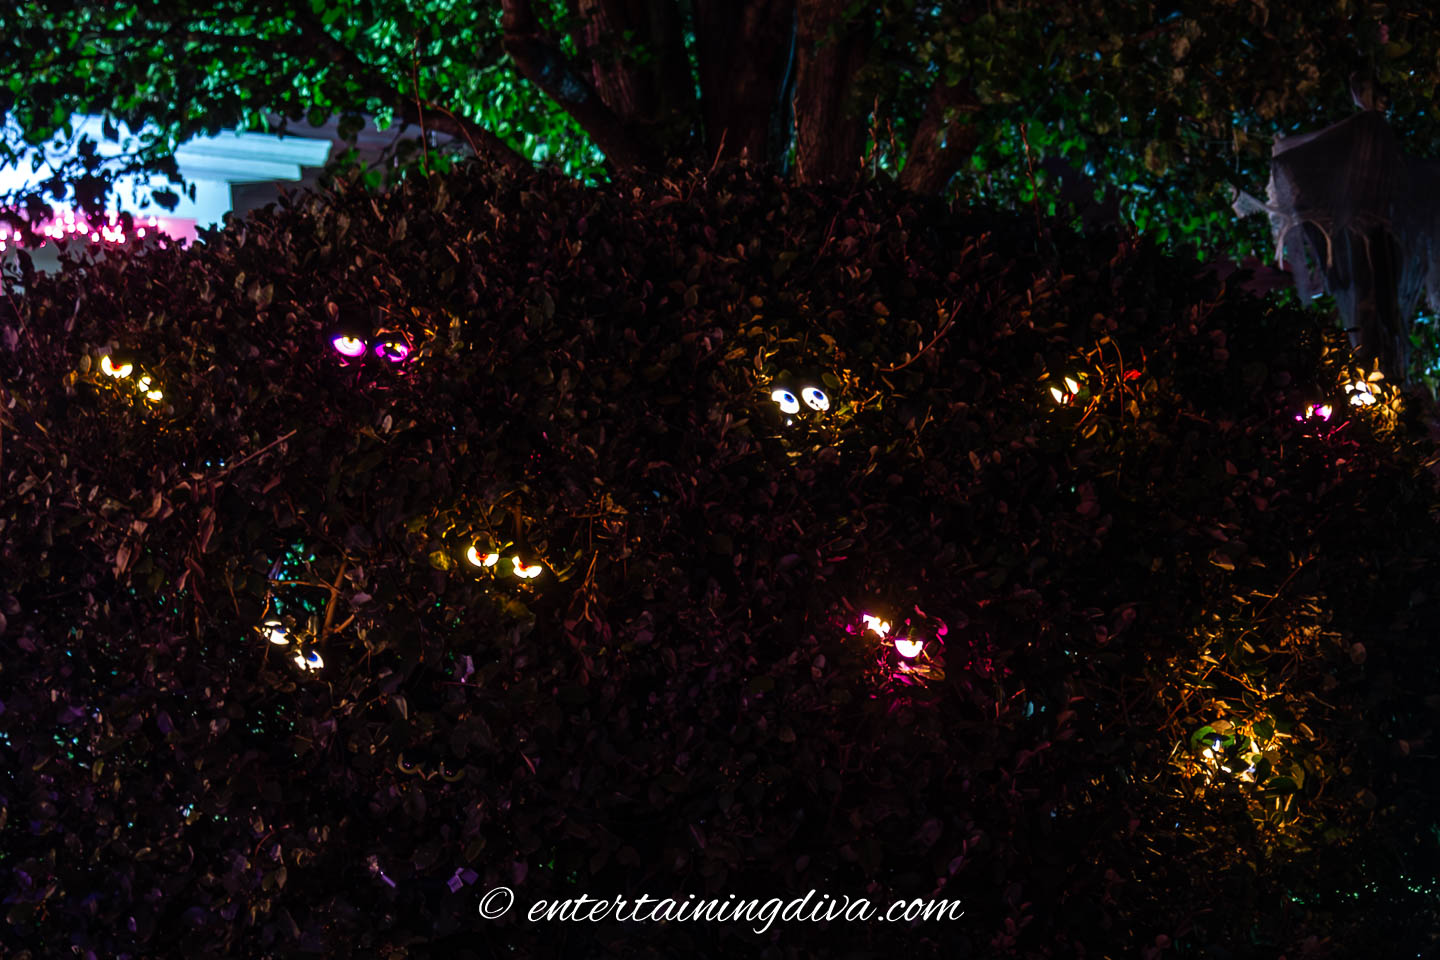 Spooky Halloween outdoor lighting with blinking eyes in a bush